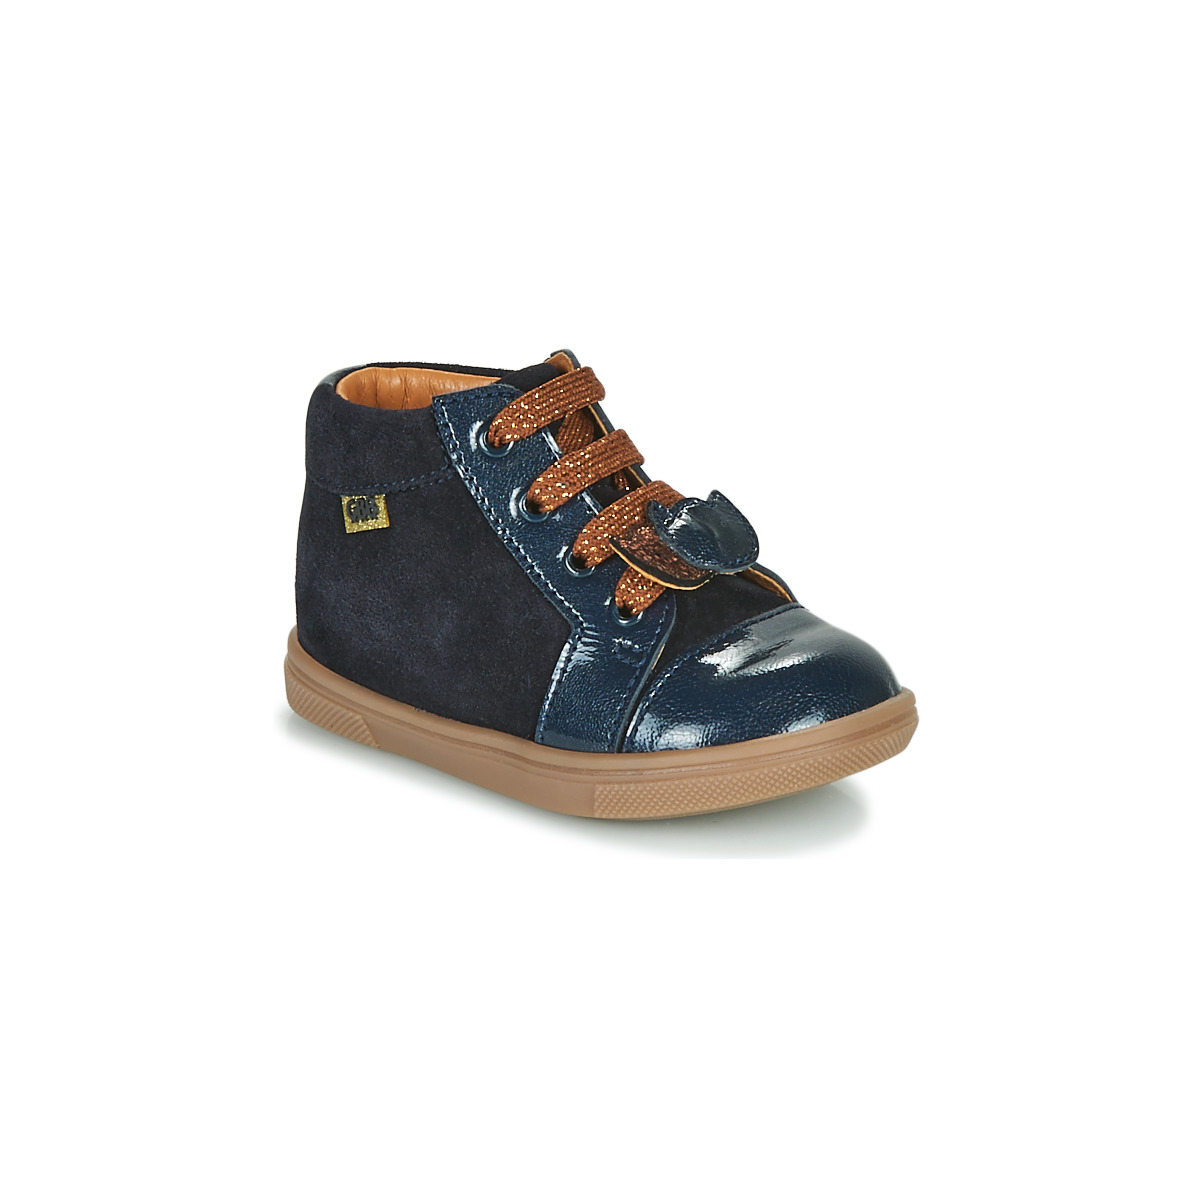 Shoes Girl Hi top trainers GBB CHOUBY Blue